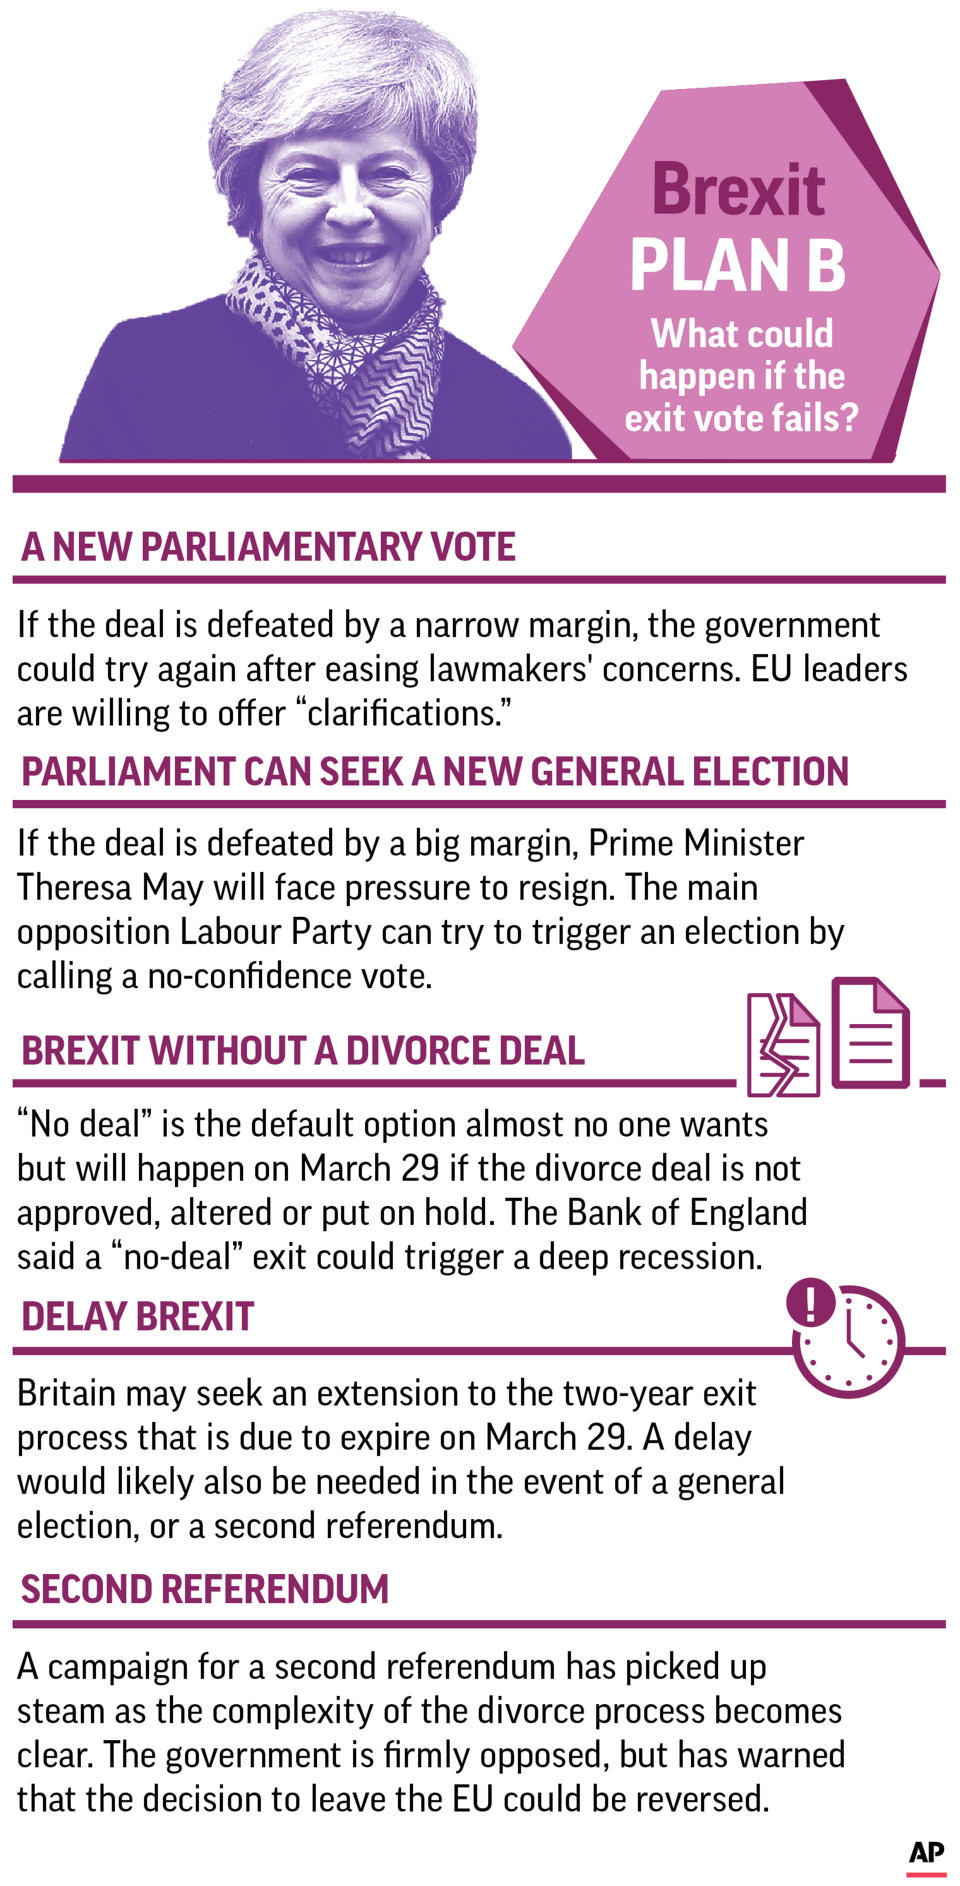 Graphic explains the various options ahead of negotiating a plan B for a Brexit; 2c x 6 1/2 inches; 96.3 mm x 165 mm;